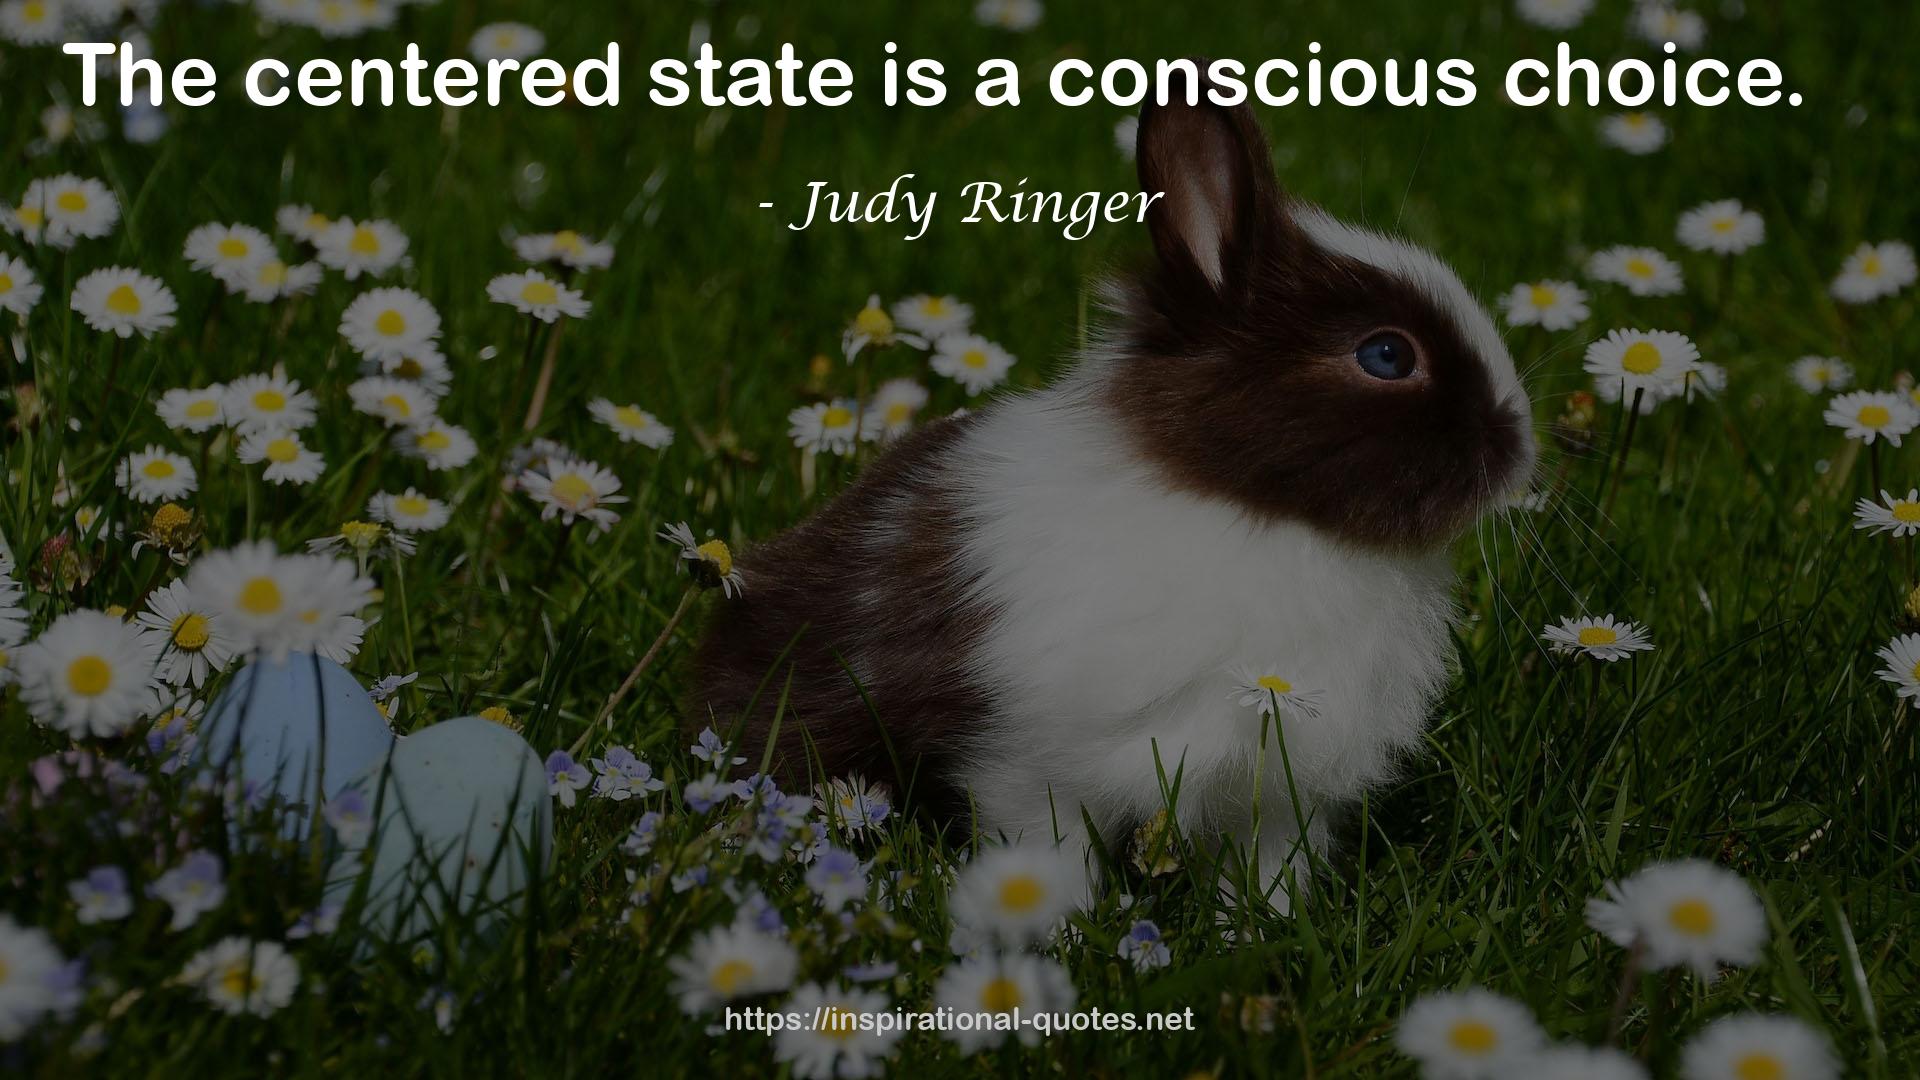 Judy Ringer QUOTES